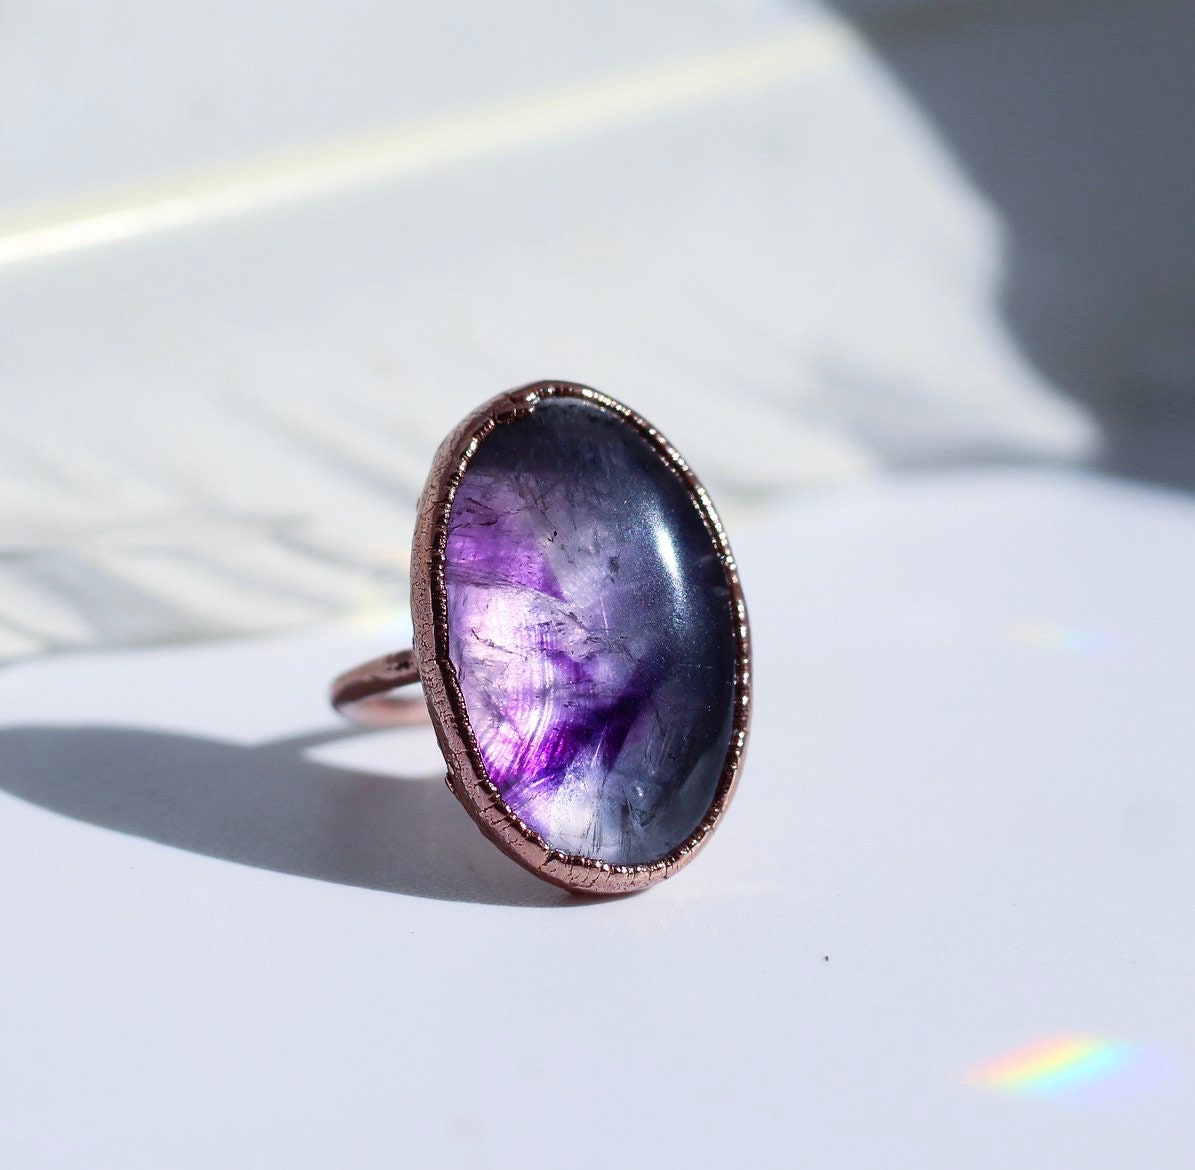 Amethyst Oval Statement Ring, Apex Amethyst Stone Ring, Witchy Crystal Ring, Amethyst Crystal Cocktail Ring, Large Polished Amethyst Ring